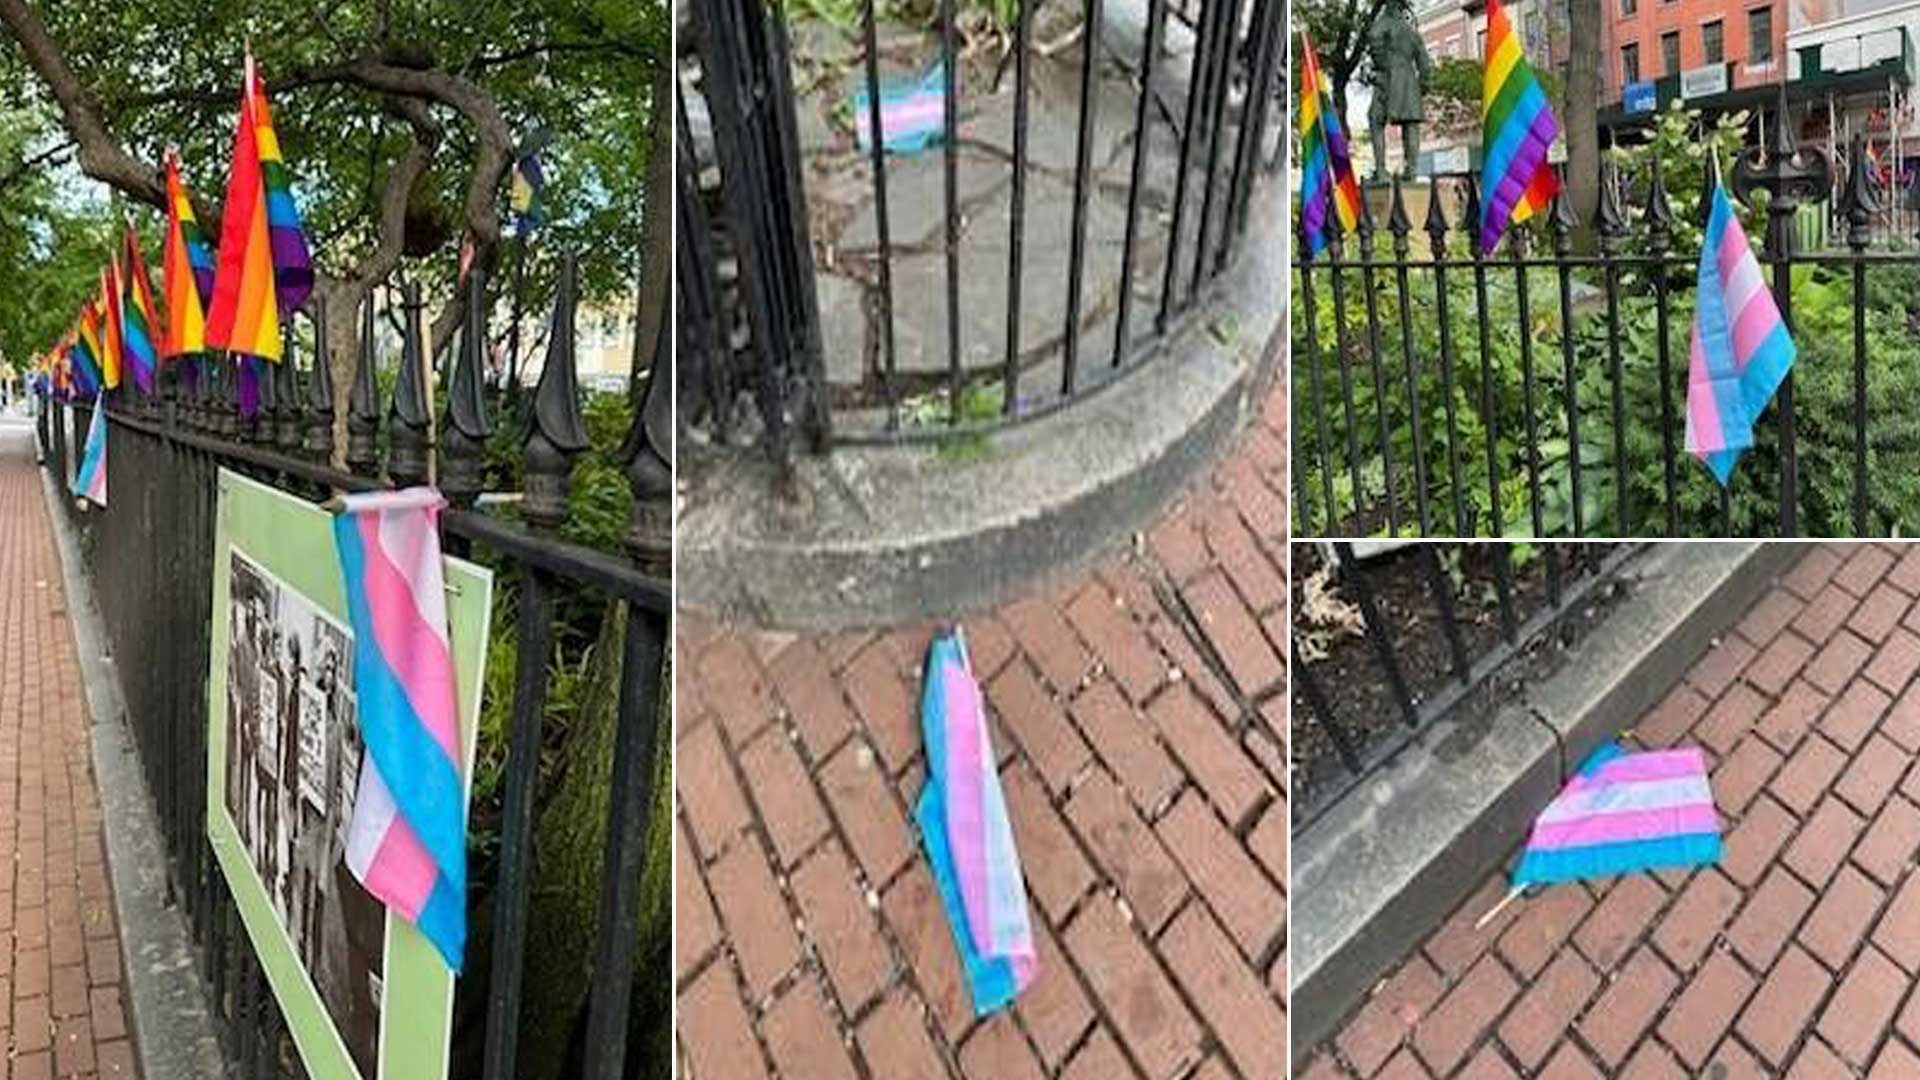 More Pride flags found vandalized at Stonewall monument in Greenwich Village